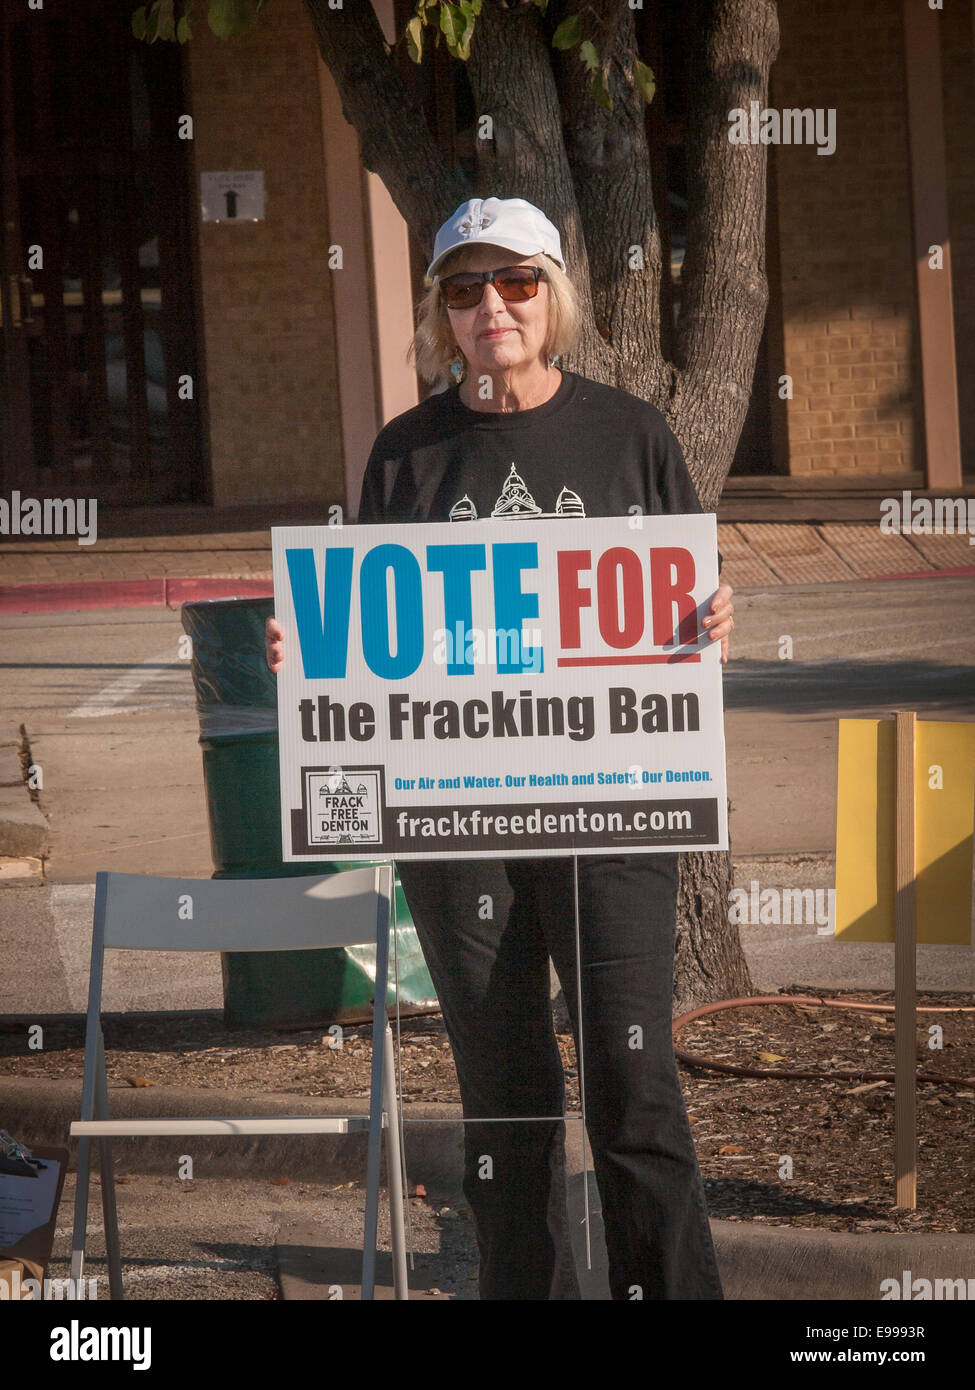 Texas, USA. 22nd Oct, 2014. Susan Vaughan greets early voters in Denton Texas residents will vote in November elections on whether to ban hydraulic fracturing when drilling for oil and natural gas. Credit:  J. G. Domke/Alamy Live News Stock Photo